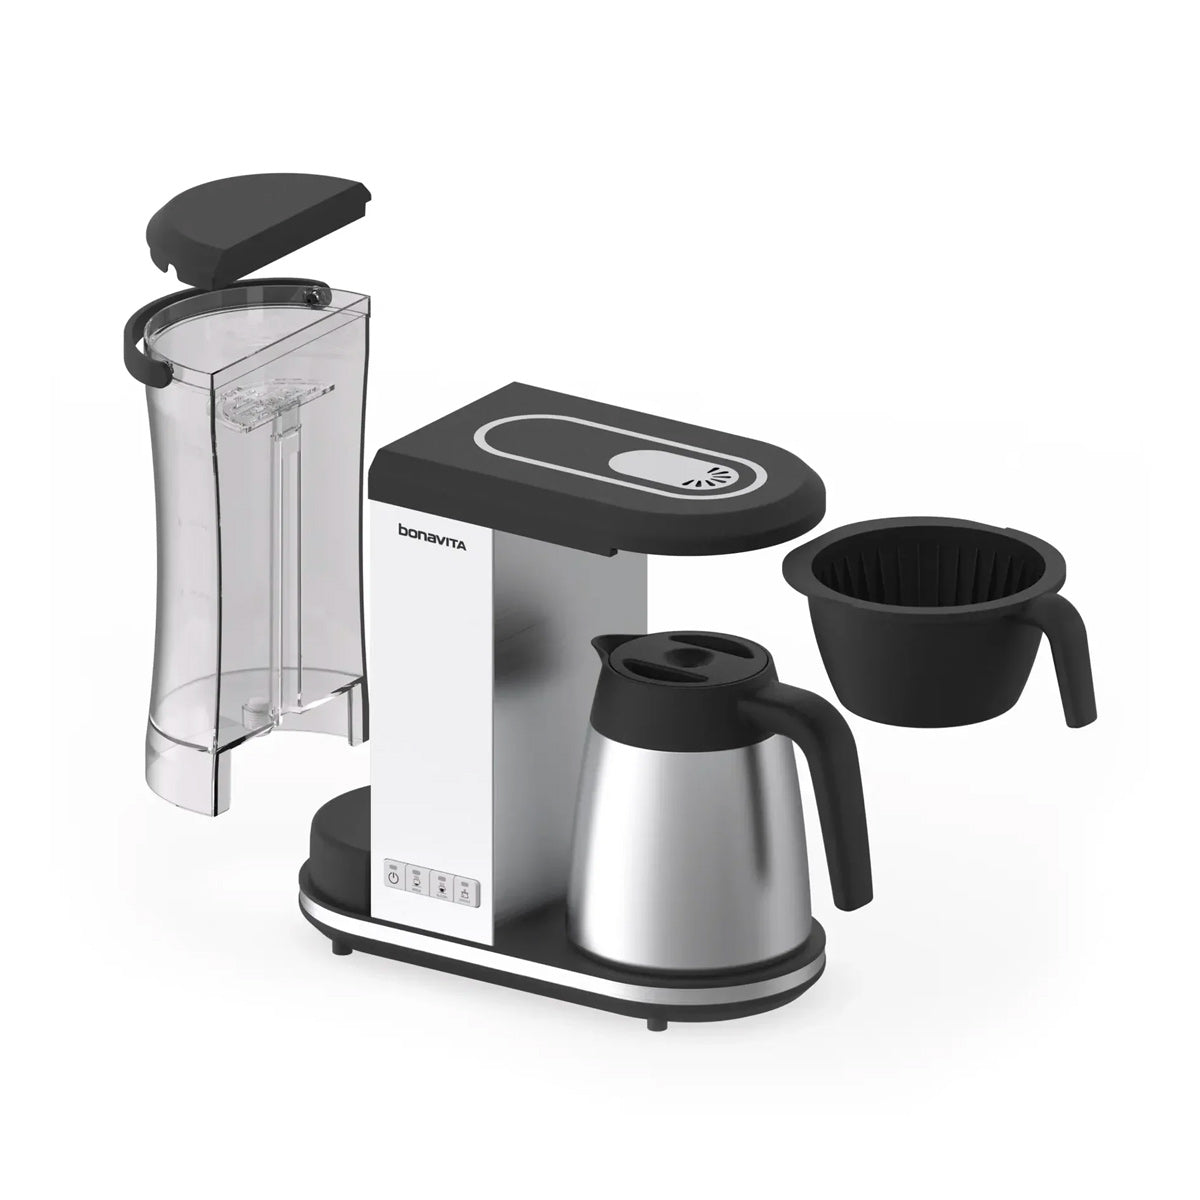 Bonavita 8-Cup Stainless Steel Carafe Coffee Brewer – The